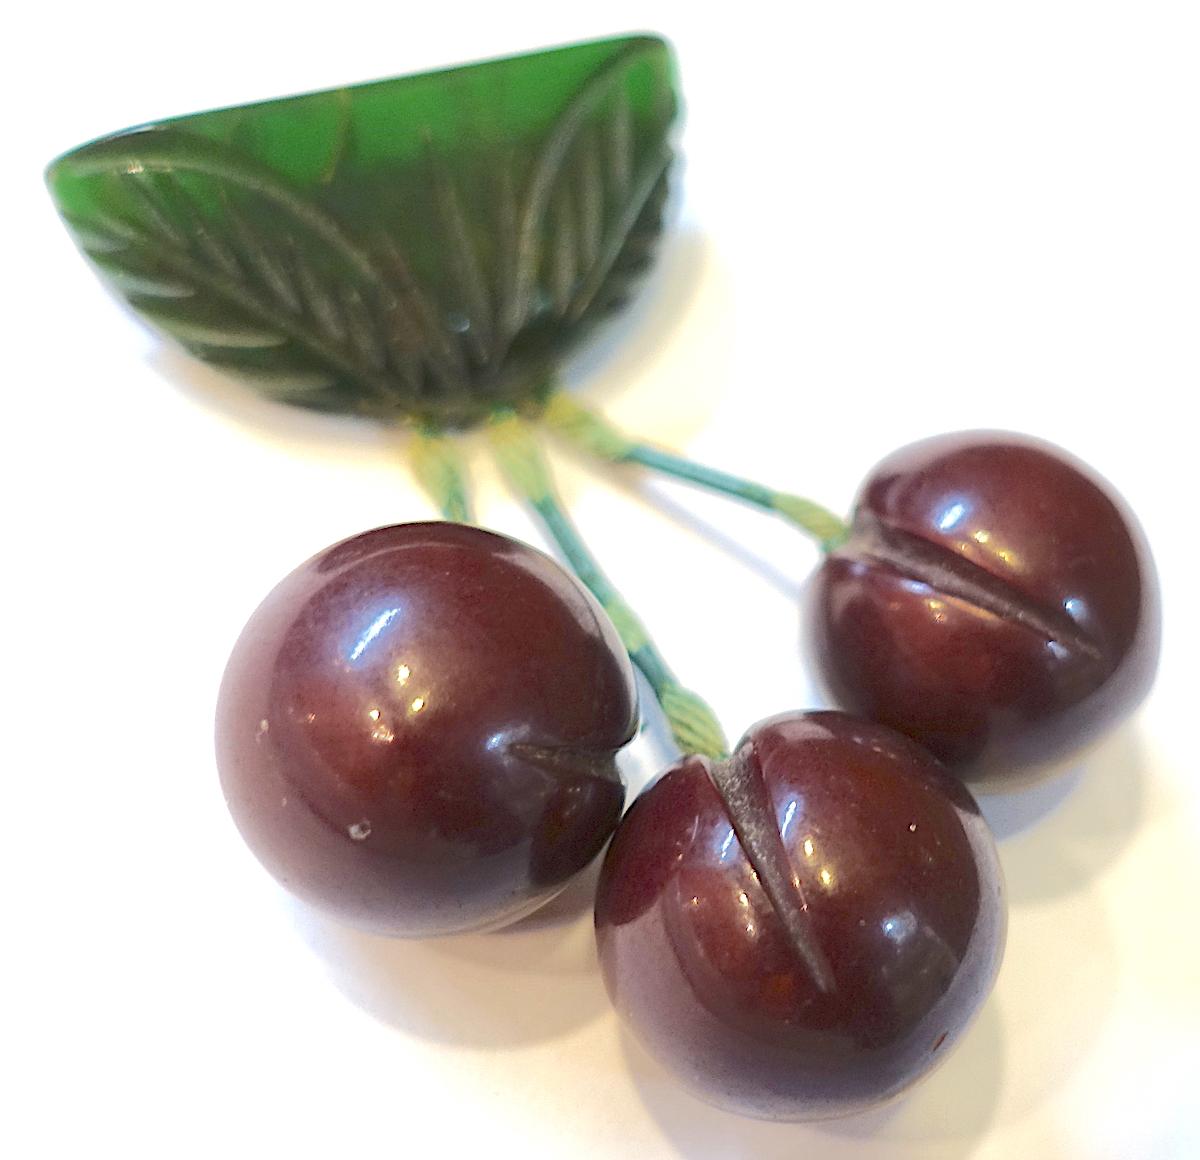 This Bakelite brooch features dark purple colored cherries suspended from green carved leaves on top.  In excellent condition, this brooch measures 2-1/4” x 1-1/4” with a c-pin clasp.